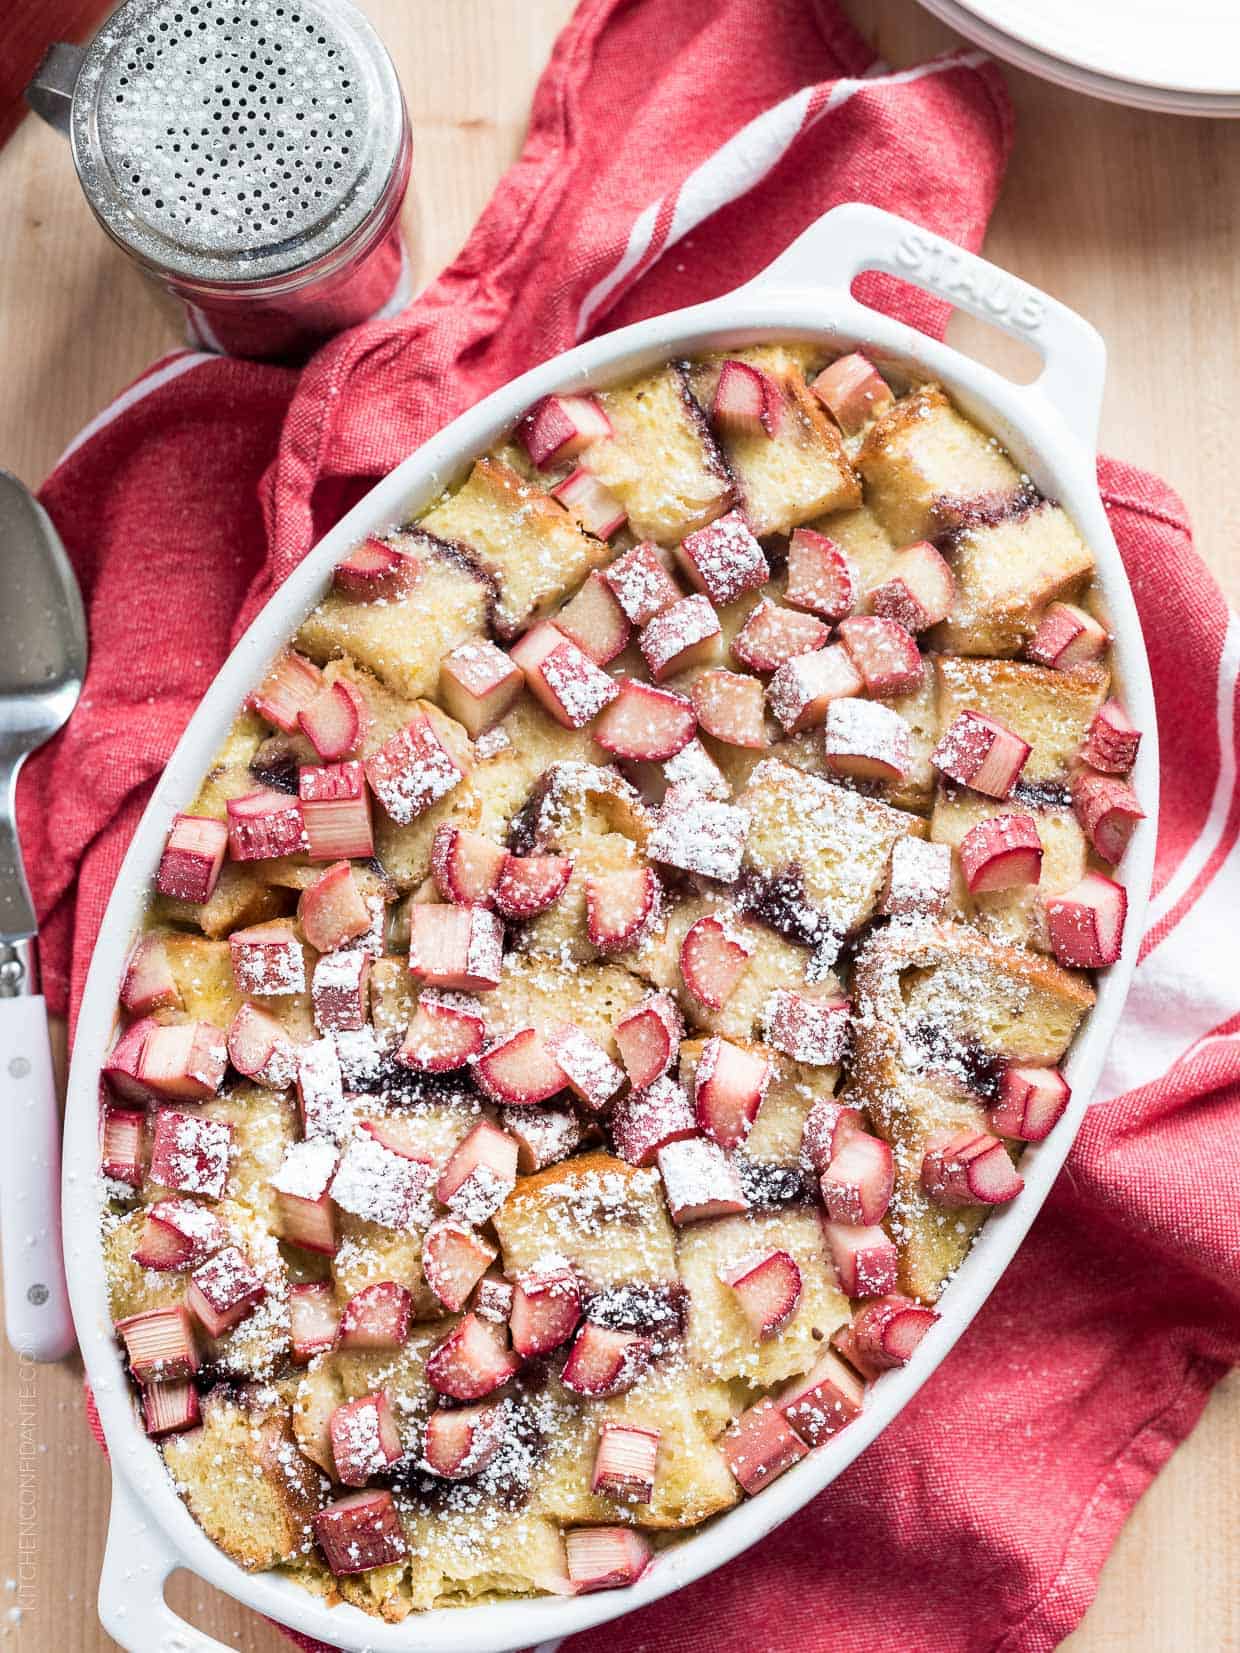 Rhubarb Breading Pudding in a white baking dish on a red and white cloth napkin.